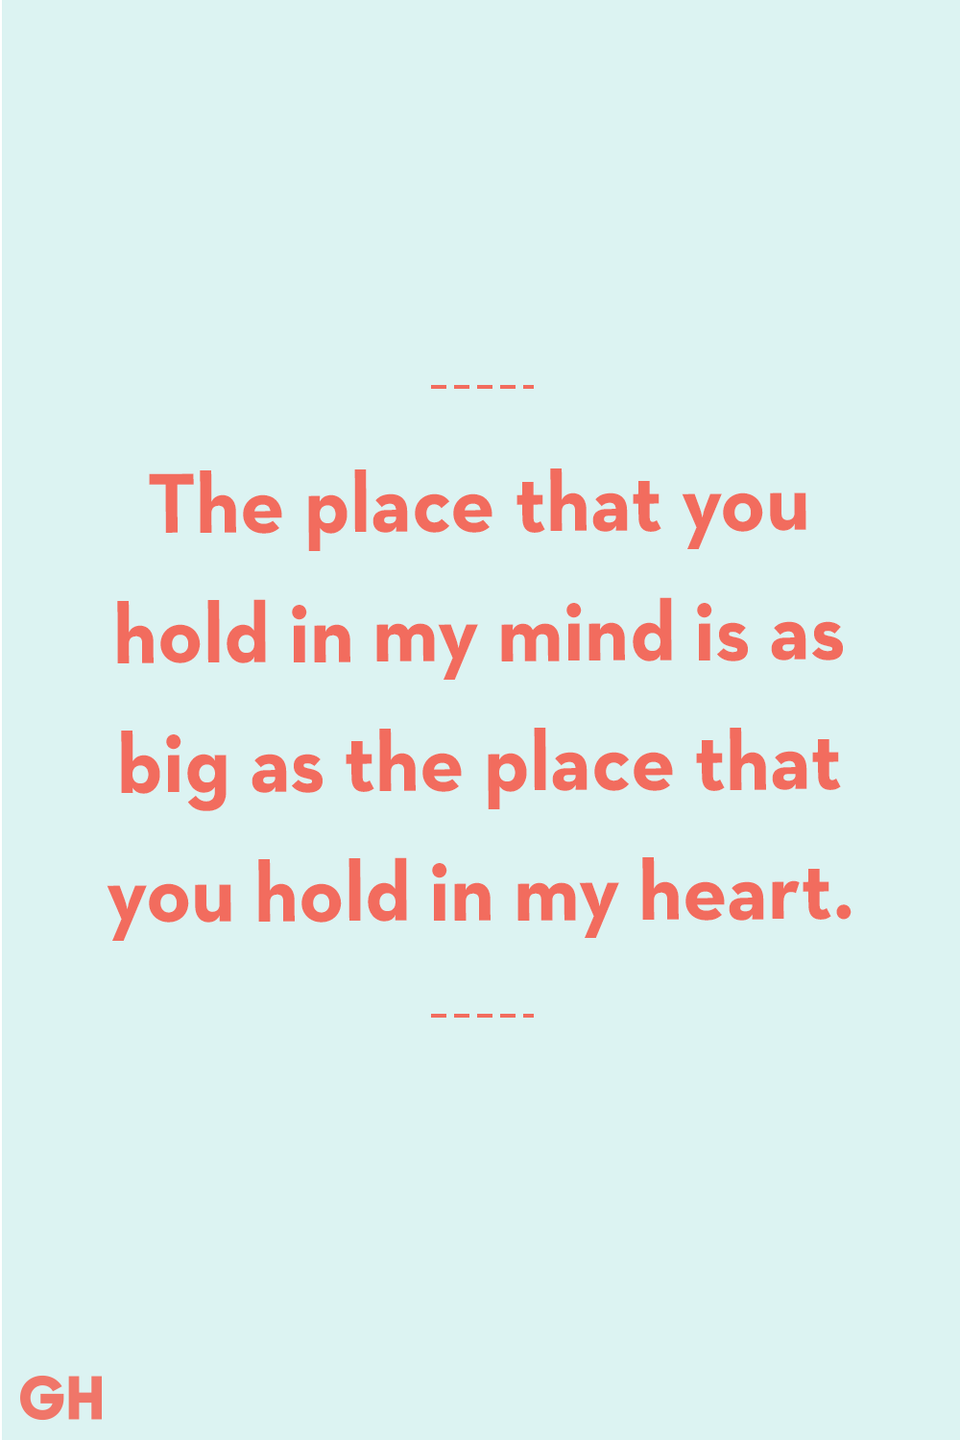 <p>The place that you hold in my mind is as big as the place that you hold in my heart.</p>